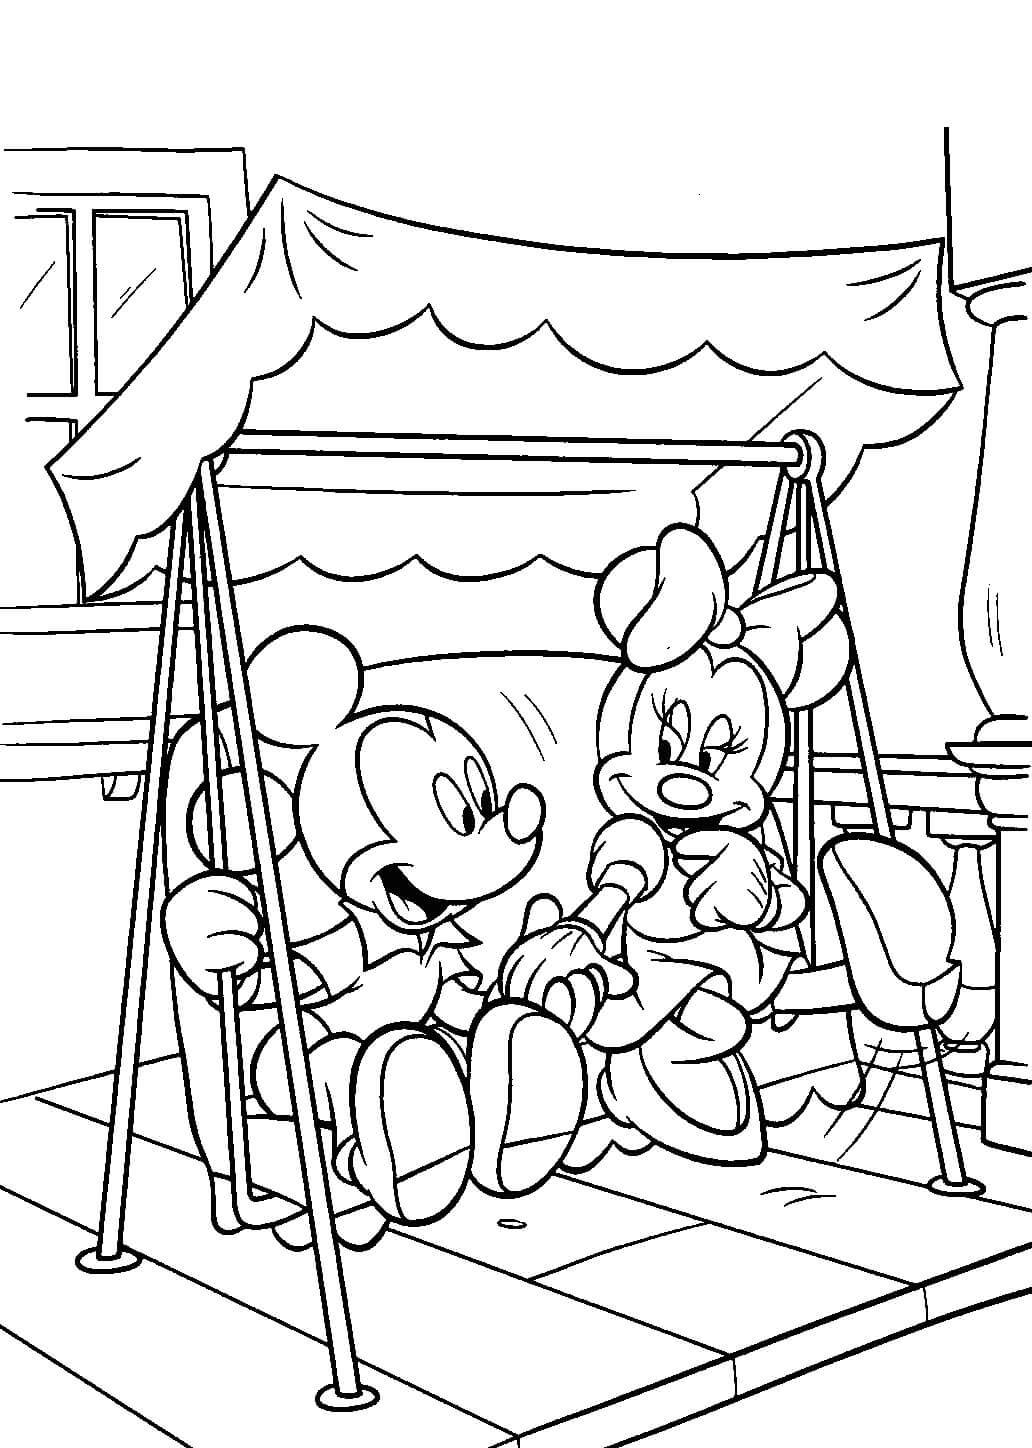 Mickey and minnie mouse play on the swings coloring page